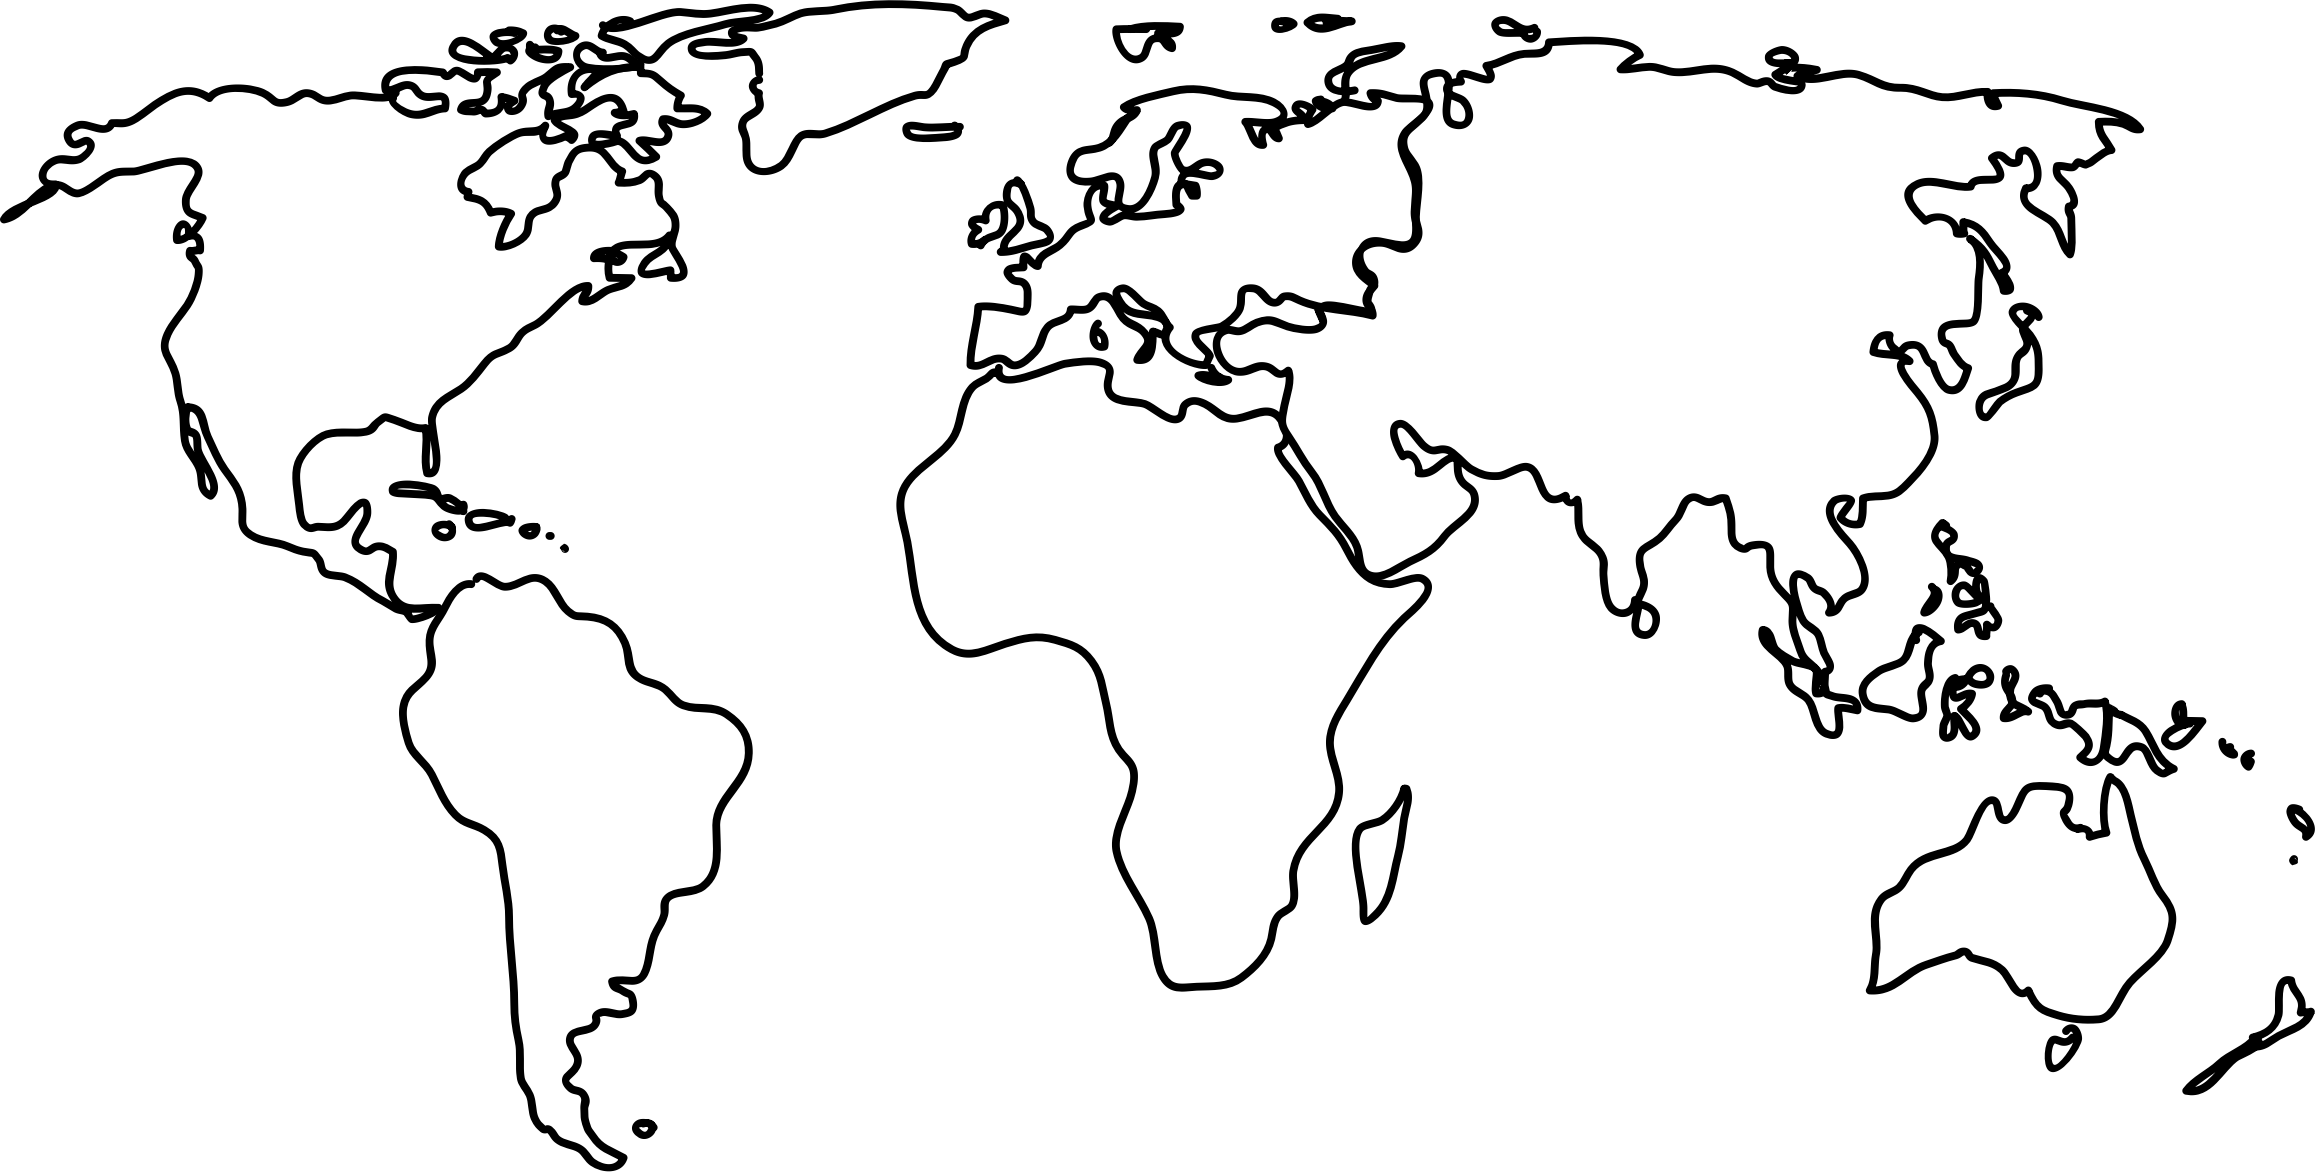 Specified countries clipart.